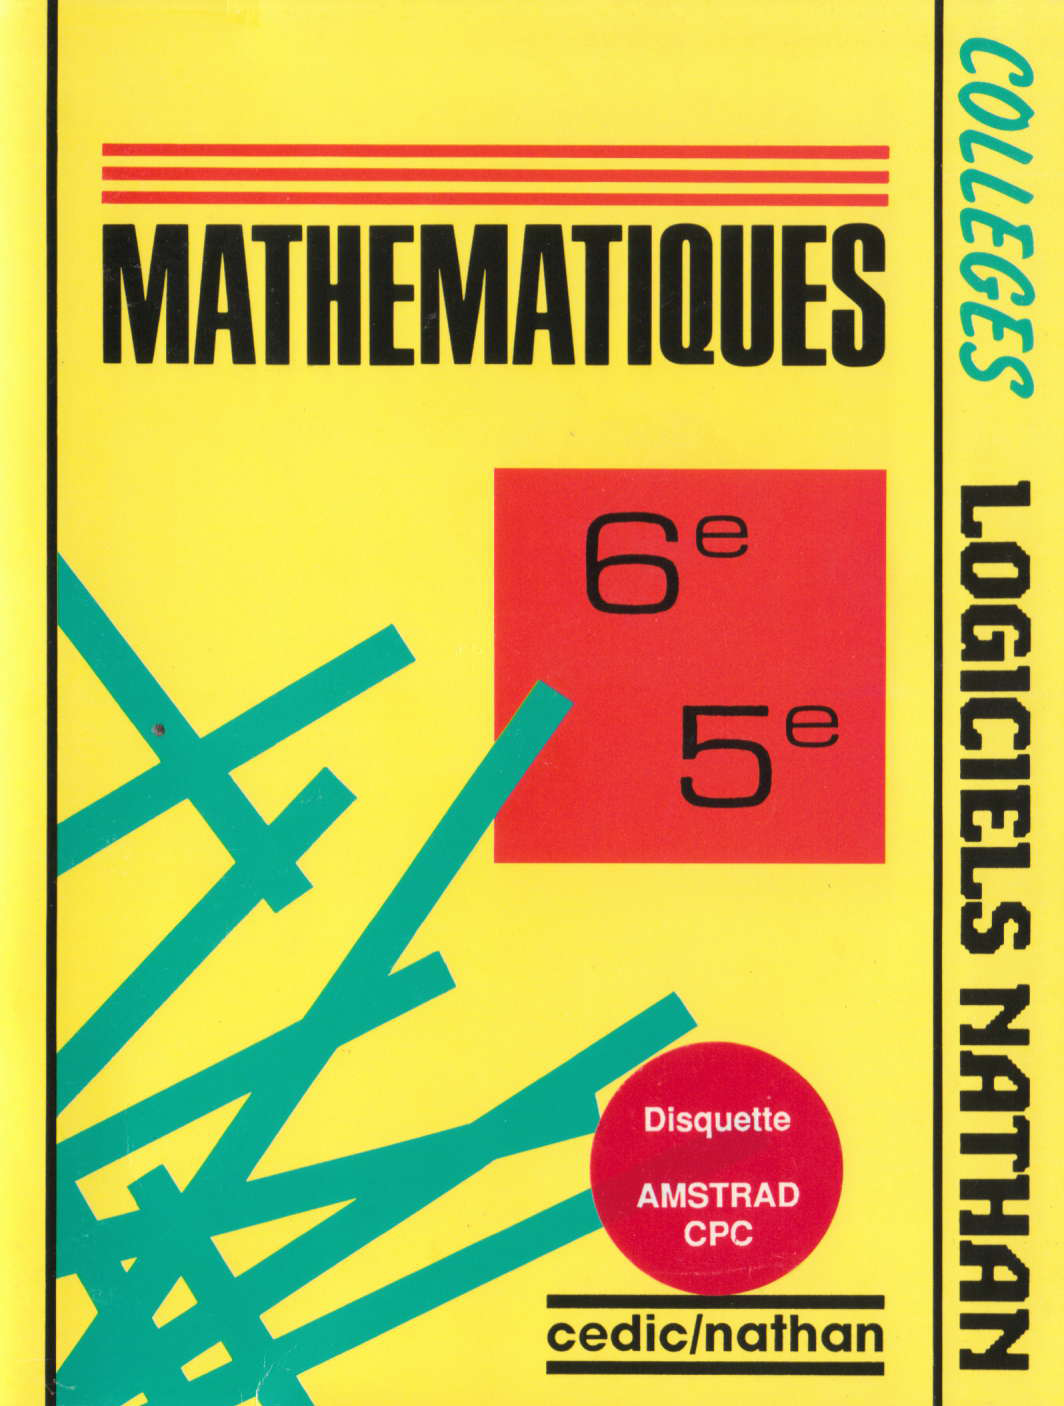 cover of the Amstrad CPC game Maths 6eme 5eme  by GameBase CPC